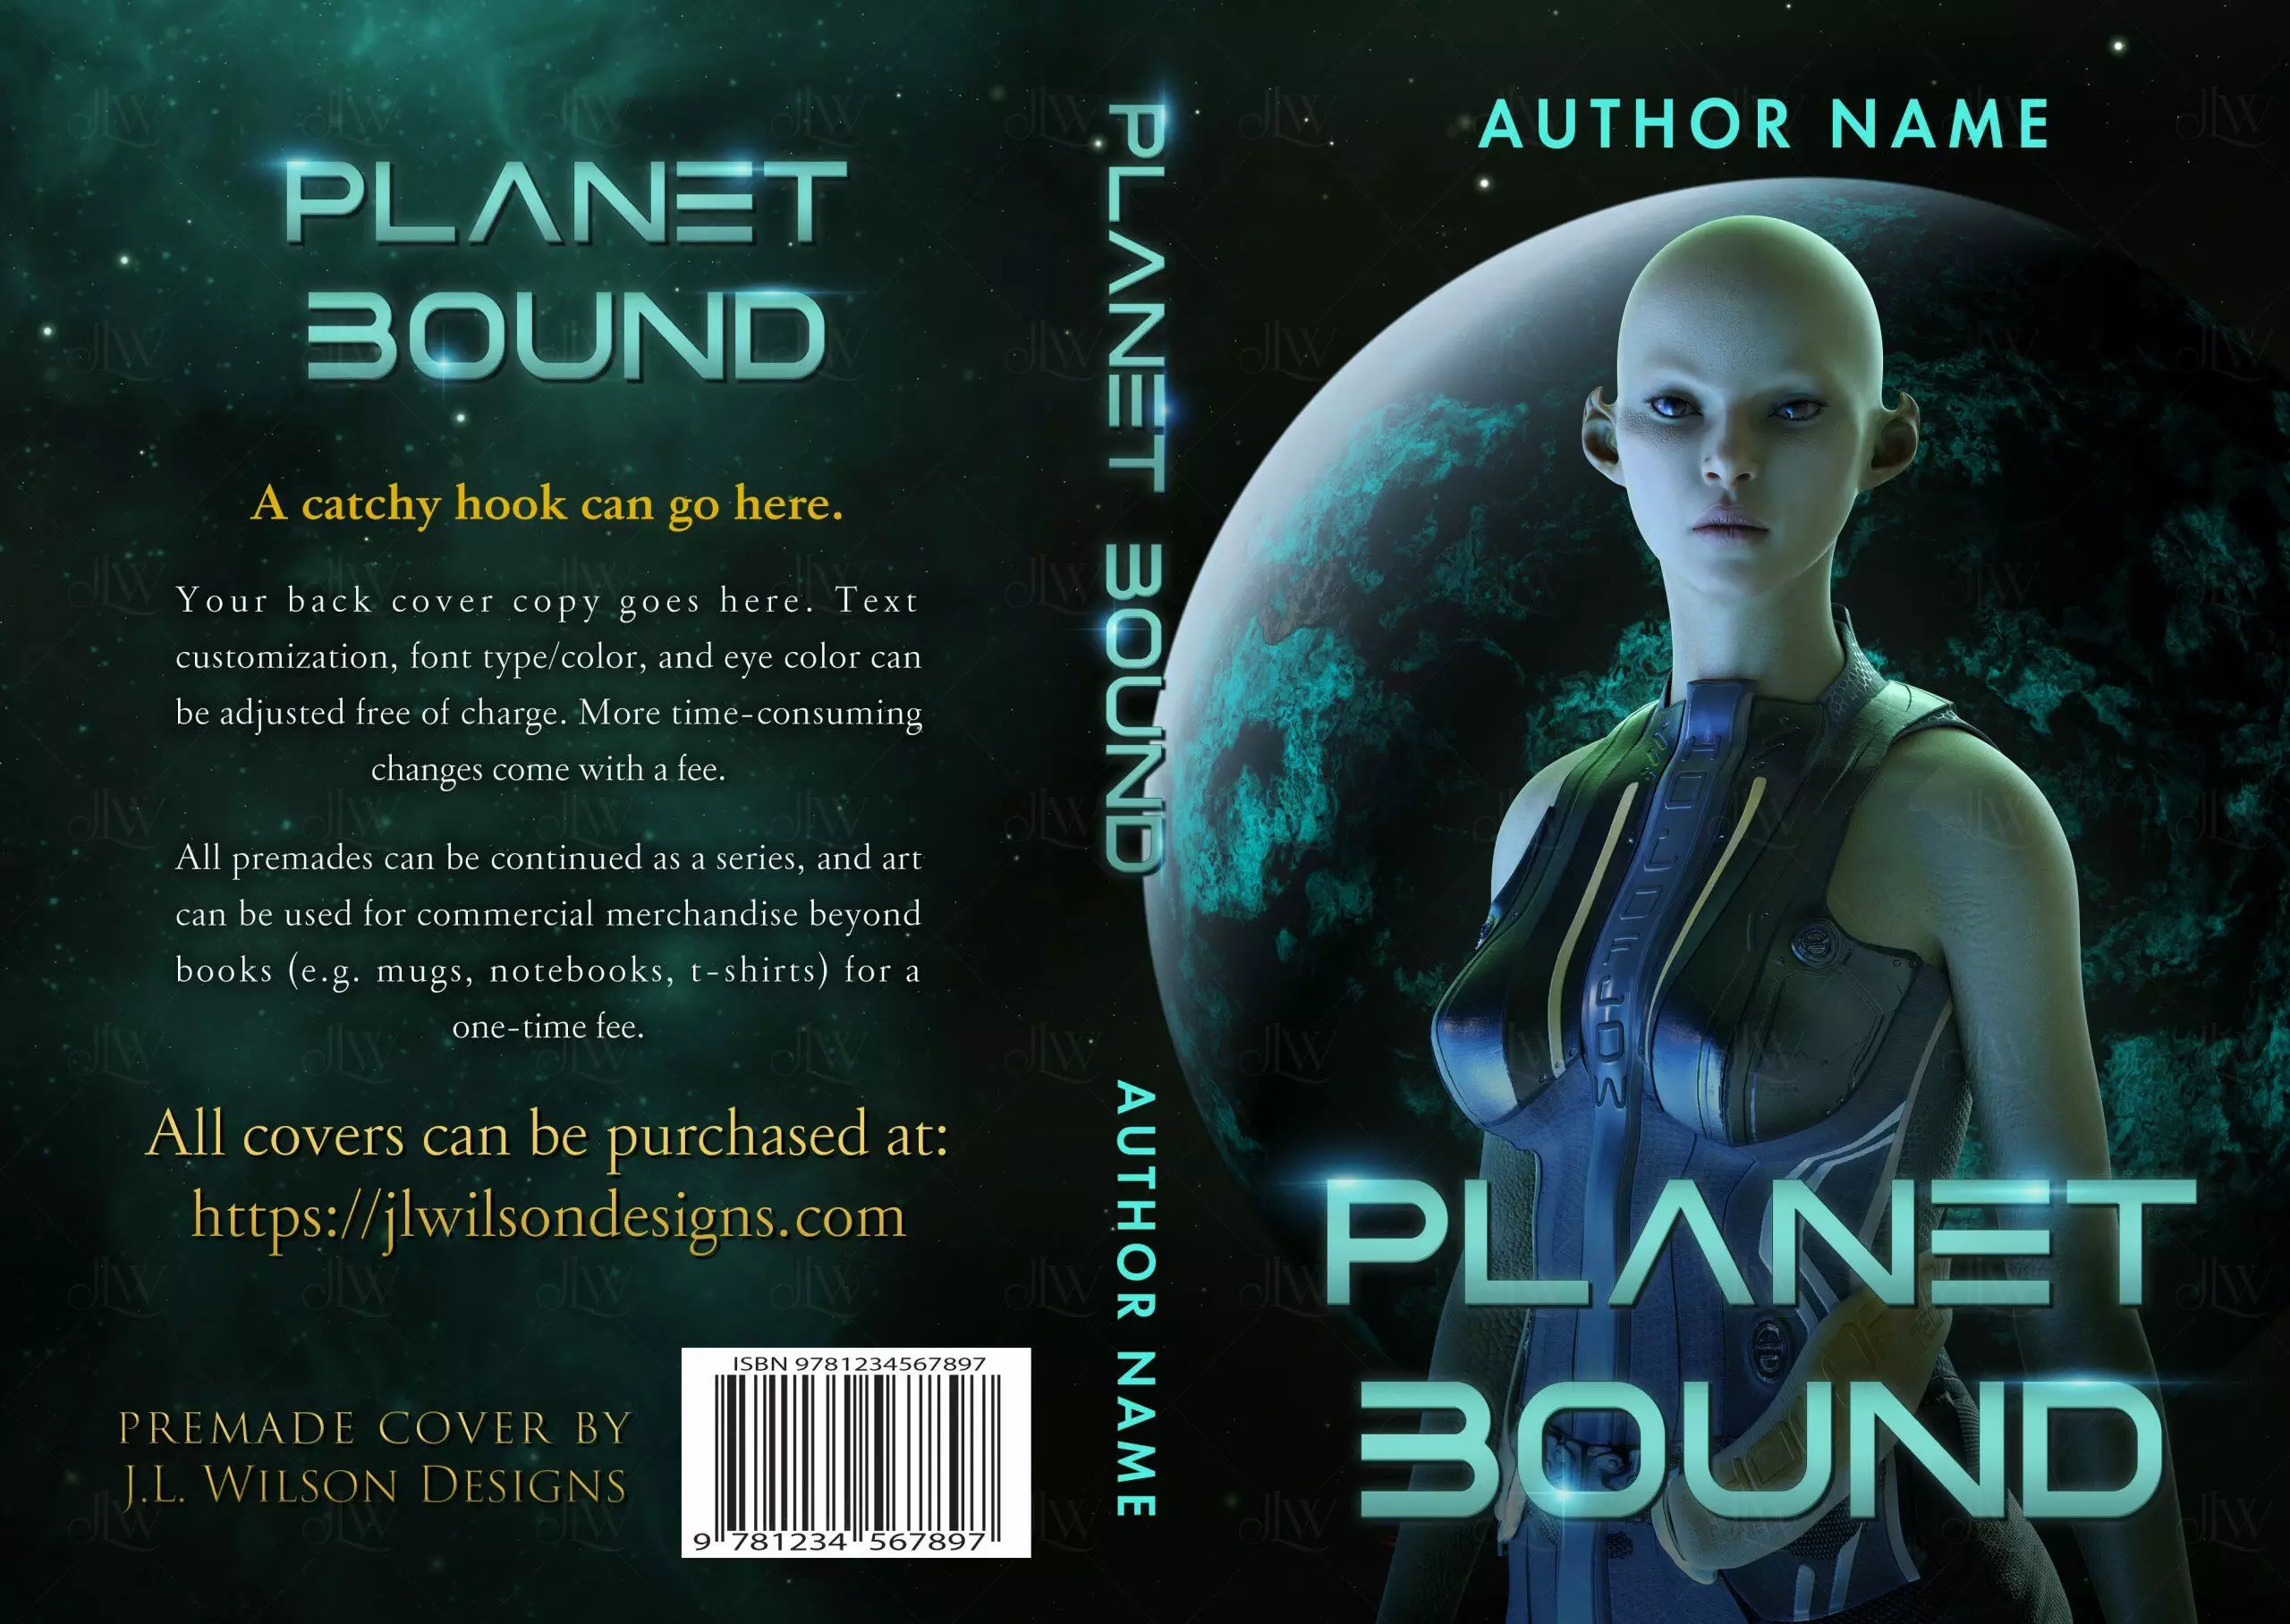 A science fiction book cover with an alien in front of a blue and green planet in space